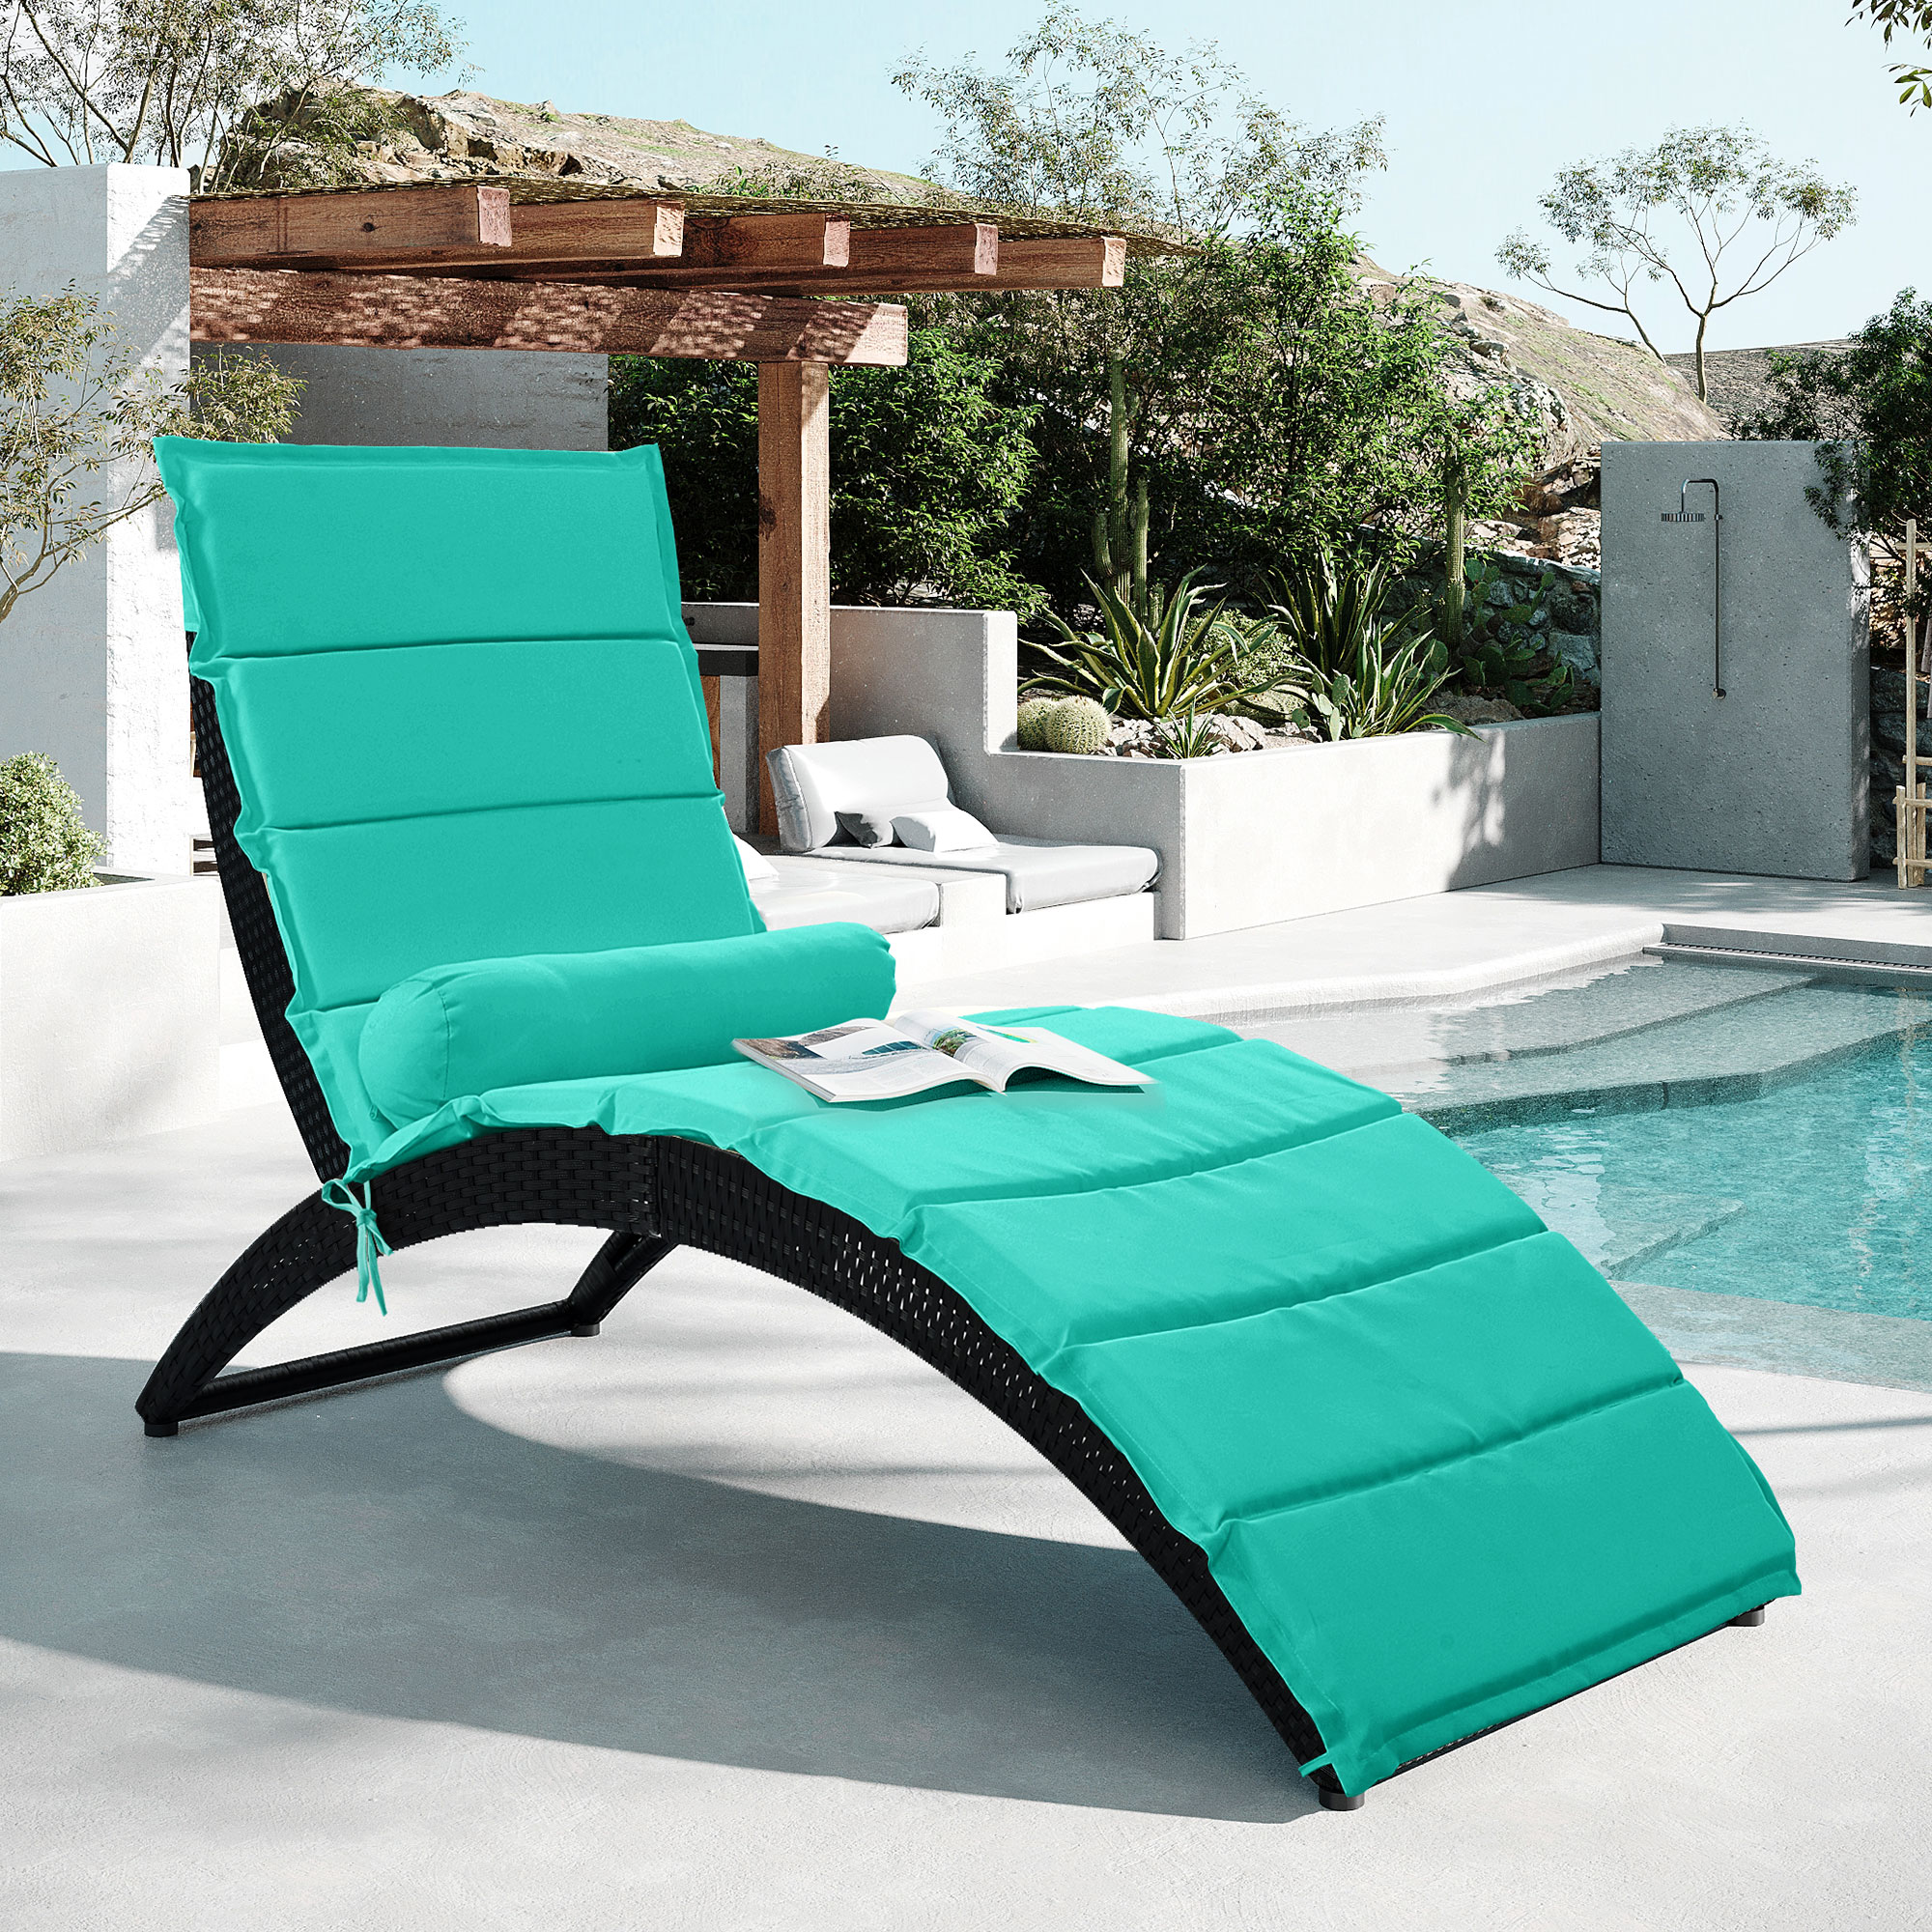 Patio Chaise Lounge, Reclining Camping Chair, PE Rattan Sun Recliner Chair with Seat Cushion, Poolside Garden Outdoor Chaise Lounge Chairs, JA1099 - image 1 of 8